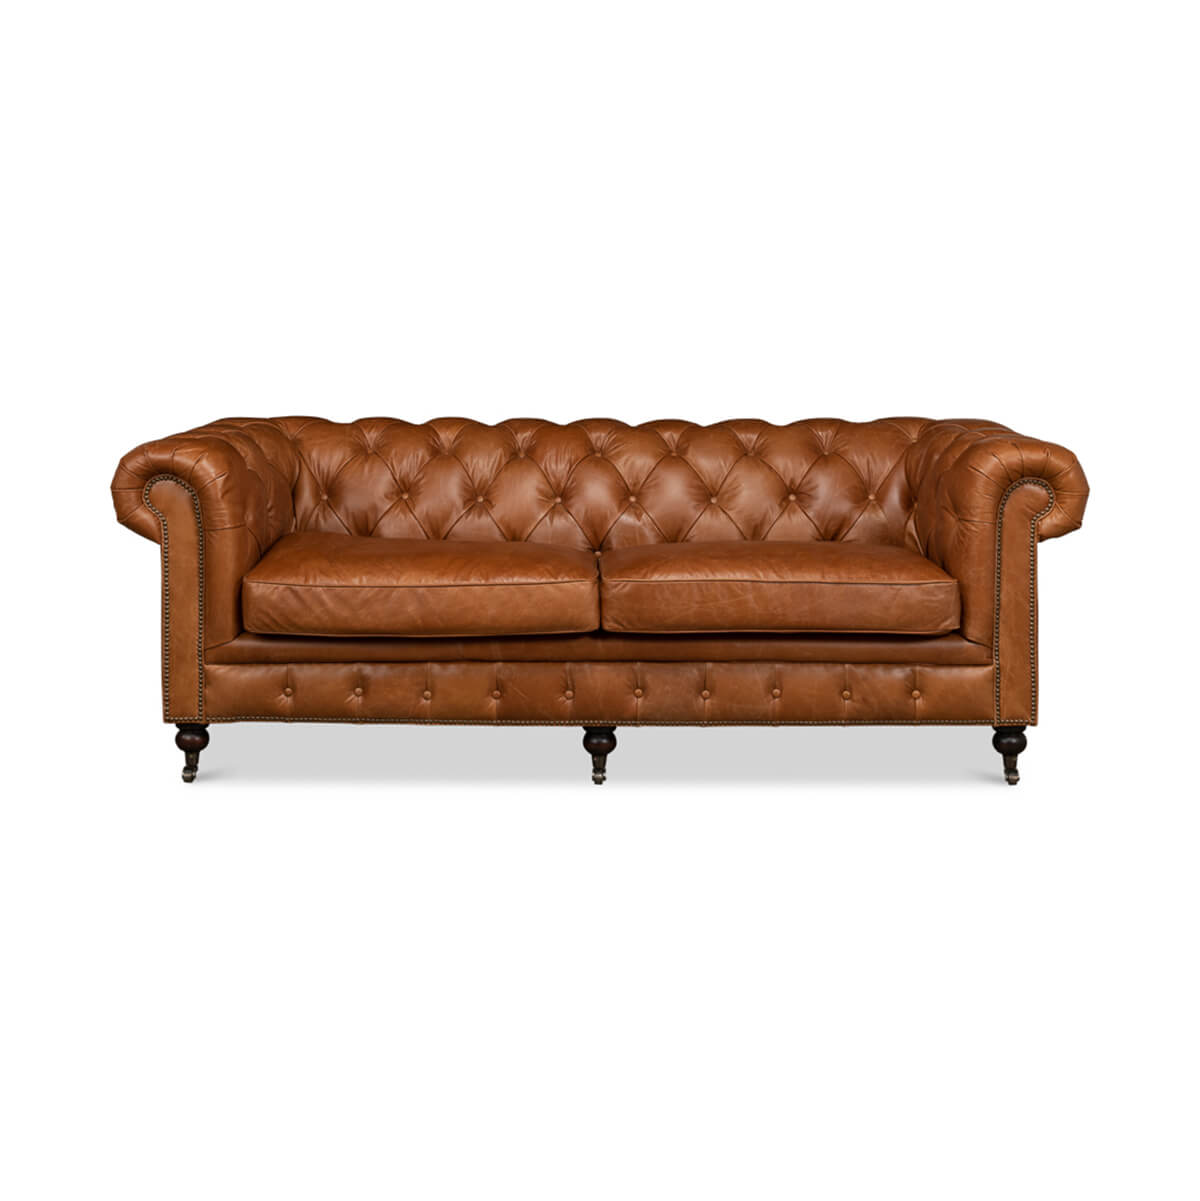 Vintage Style Classic Chesterfield Sofa - Vienna Brown Leather - English Georgian America